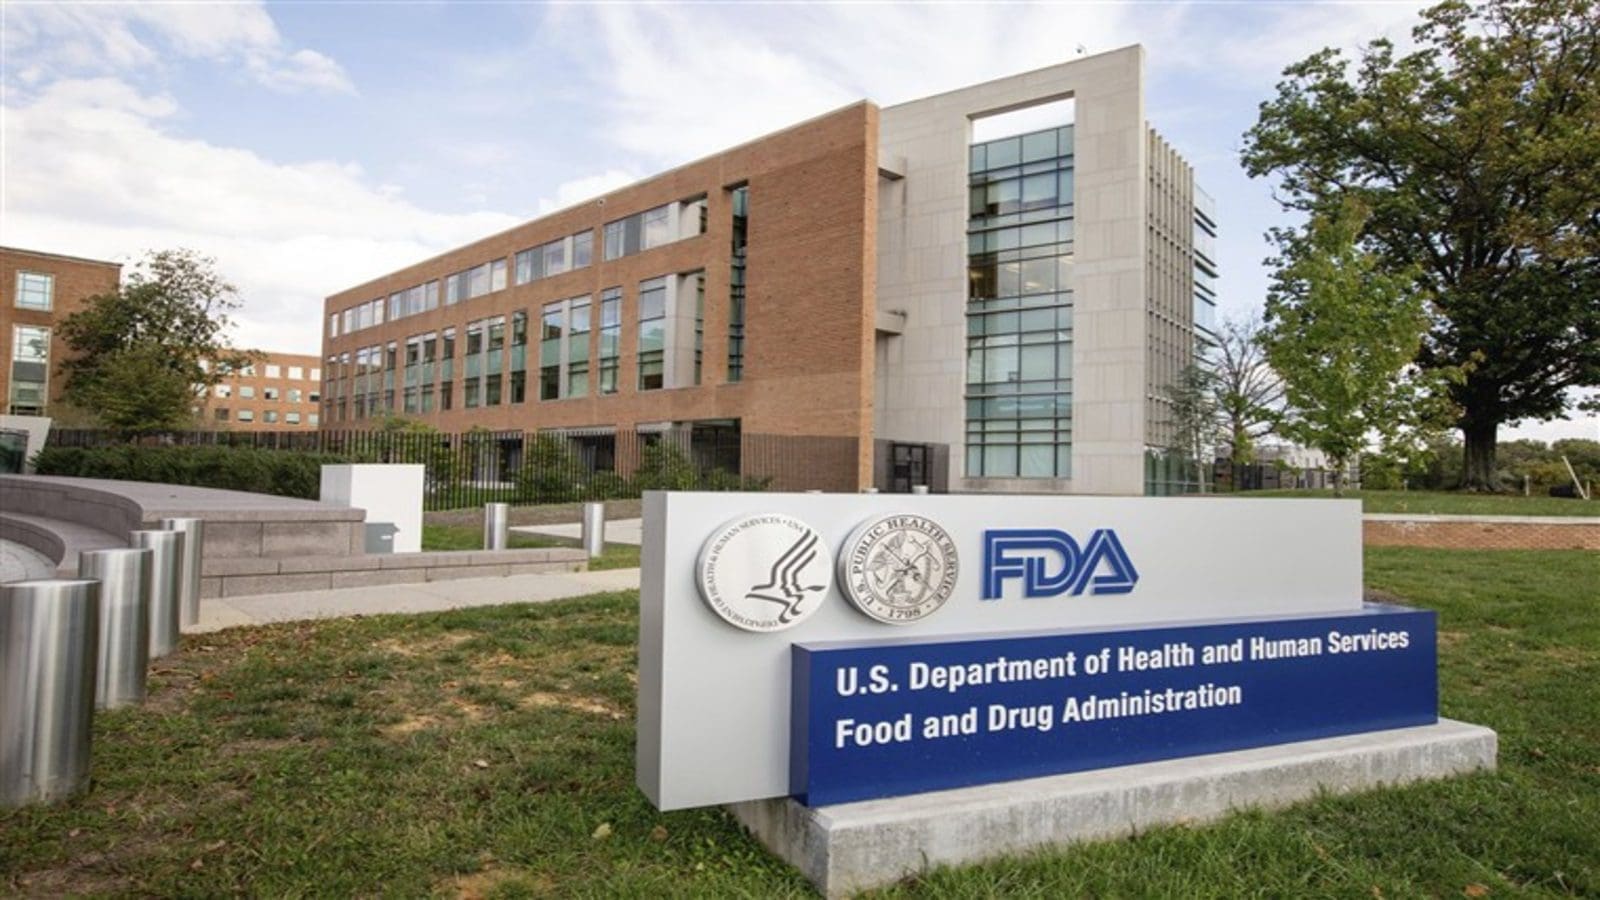 FDA seeks external aid in evaluating its food program amidst discontent on performance